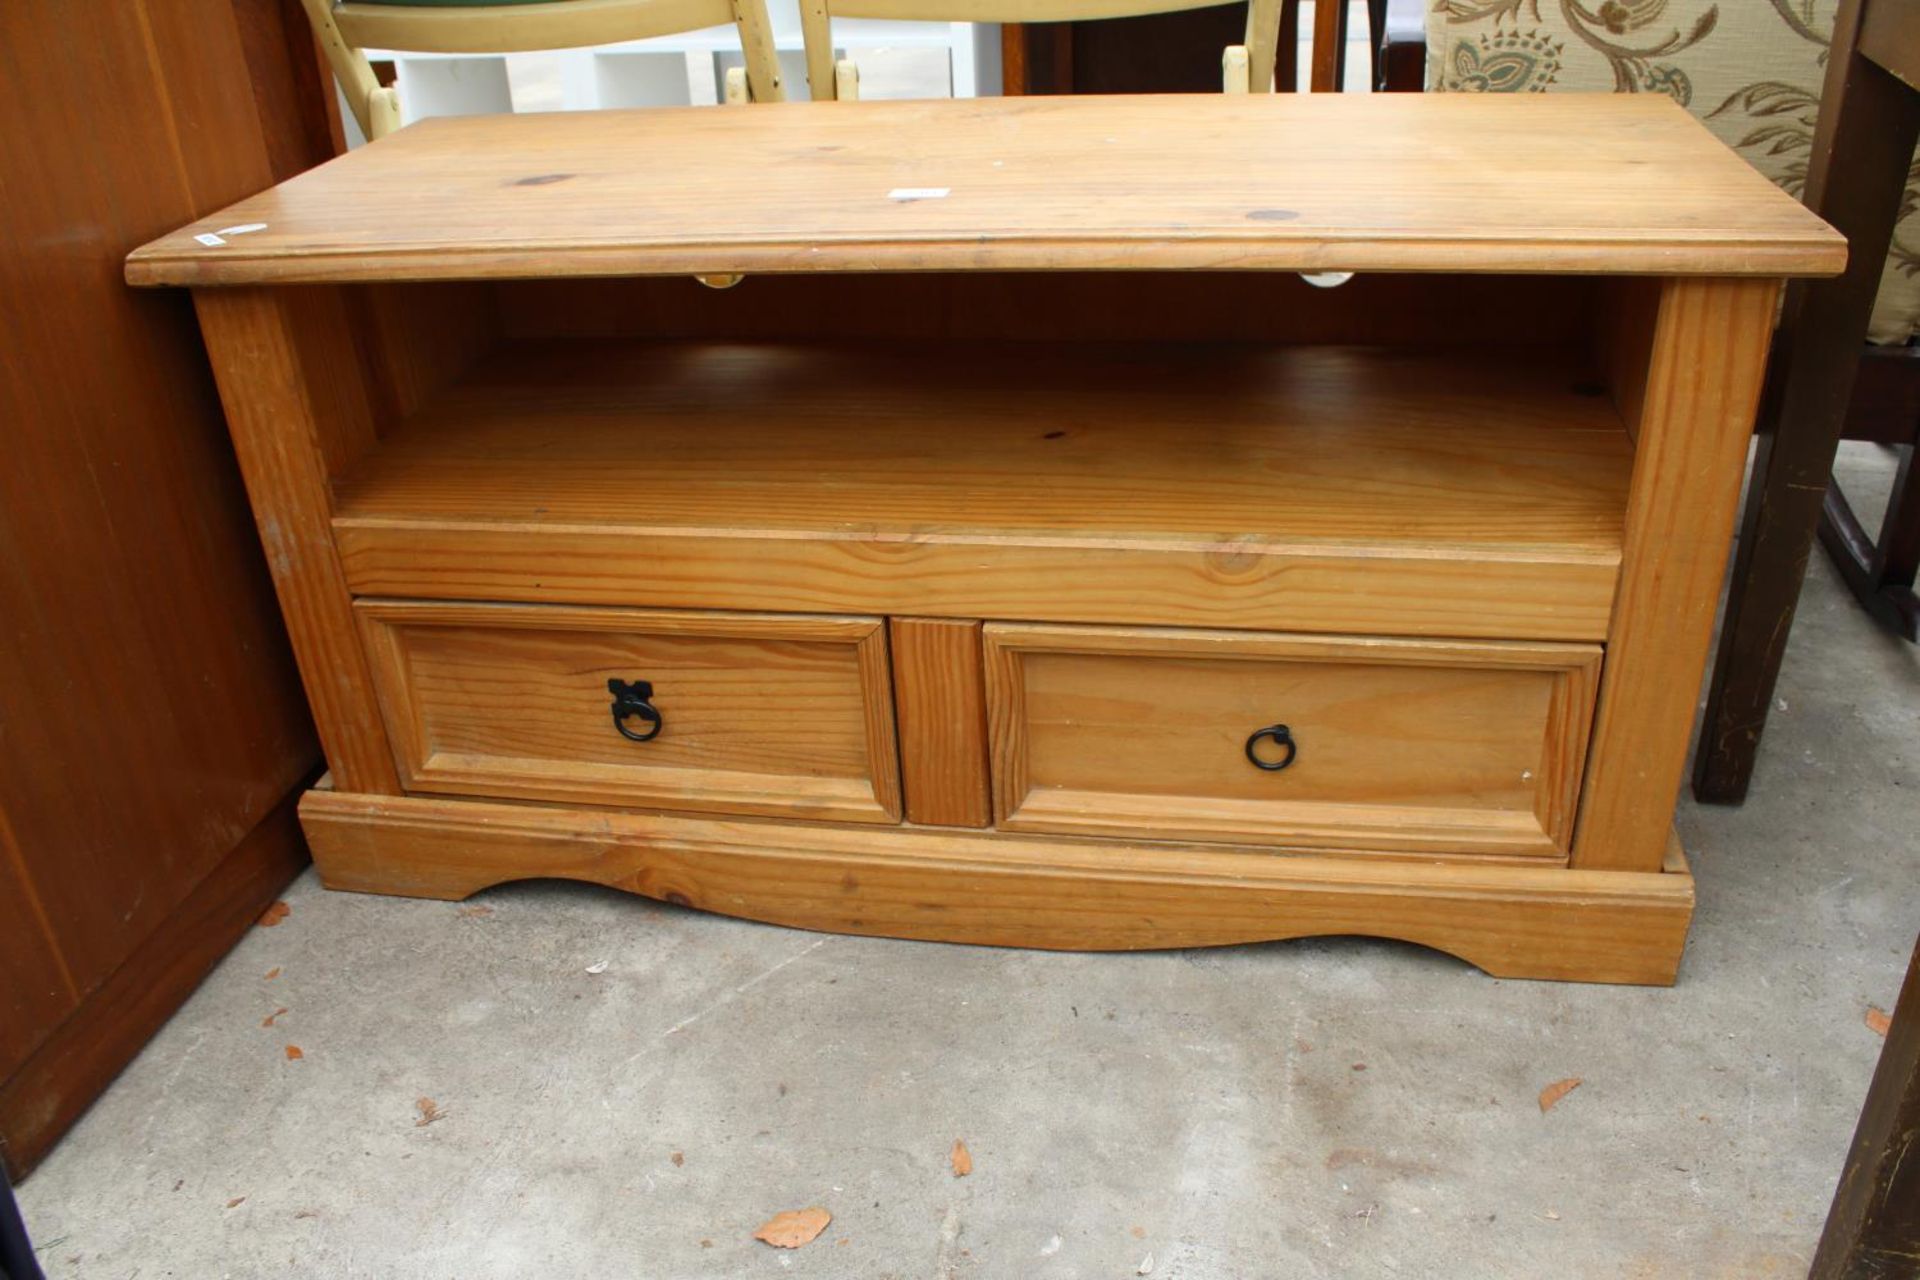 A MEXICAN PINE T.V. STAND, 43" WIDE - Image 2 of 2